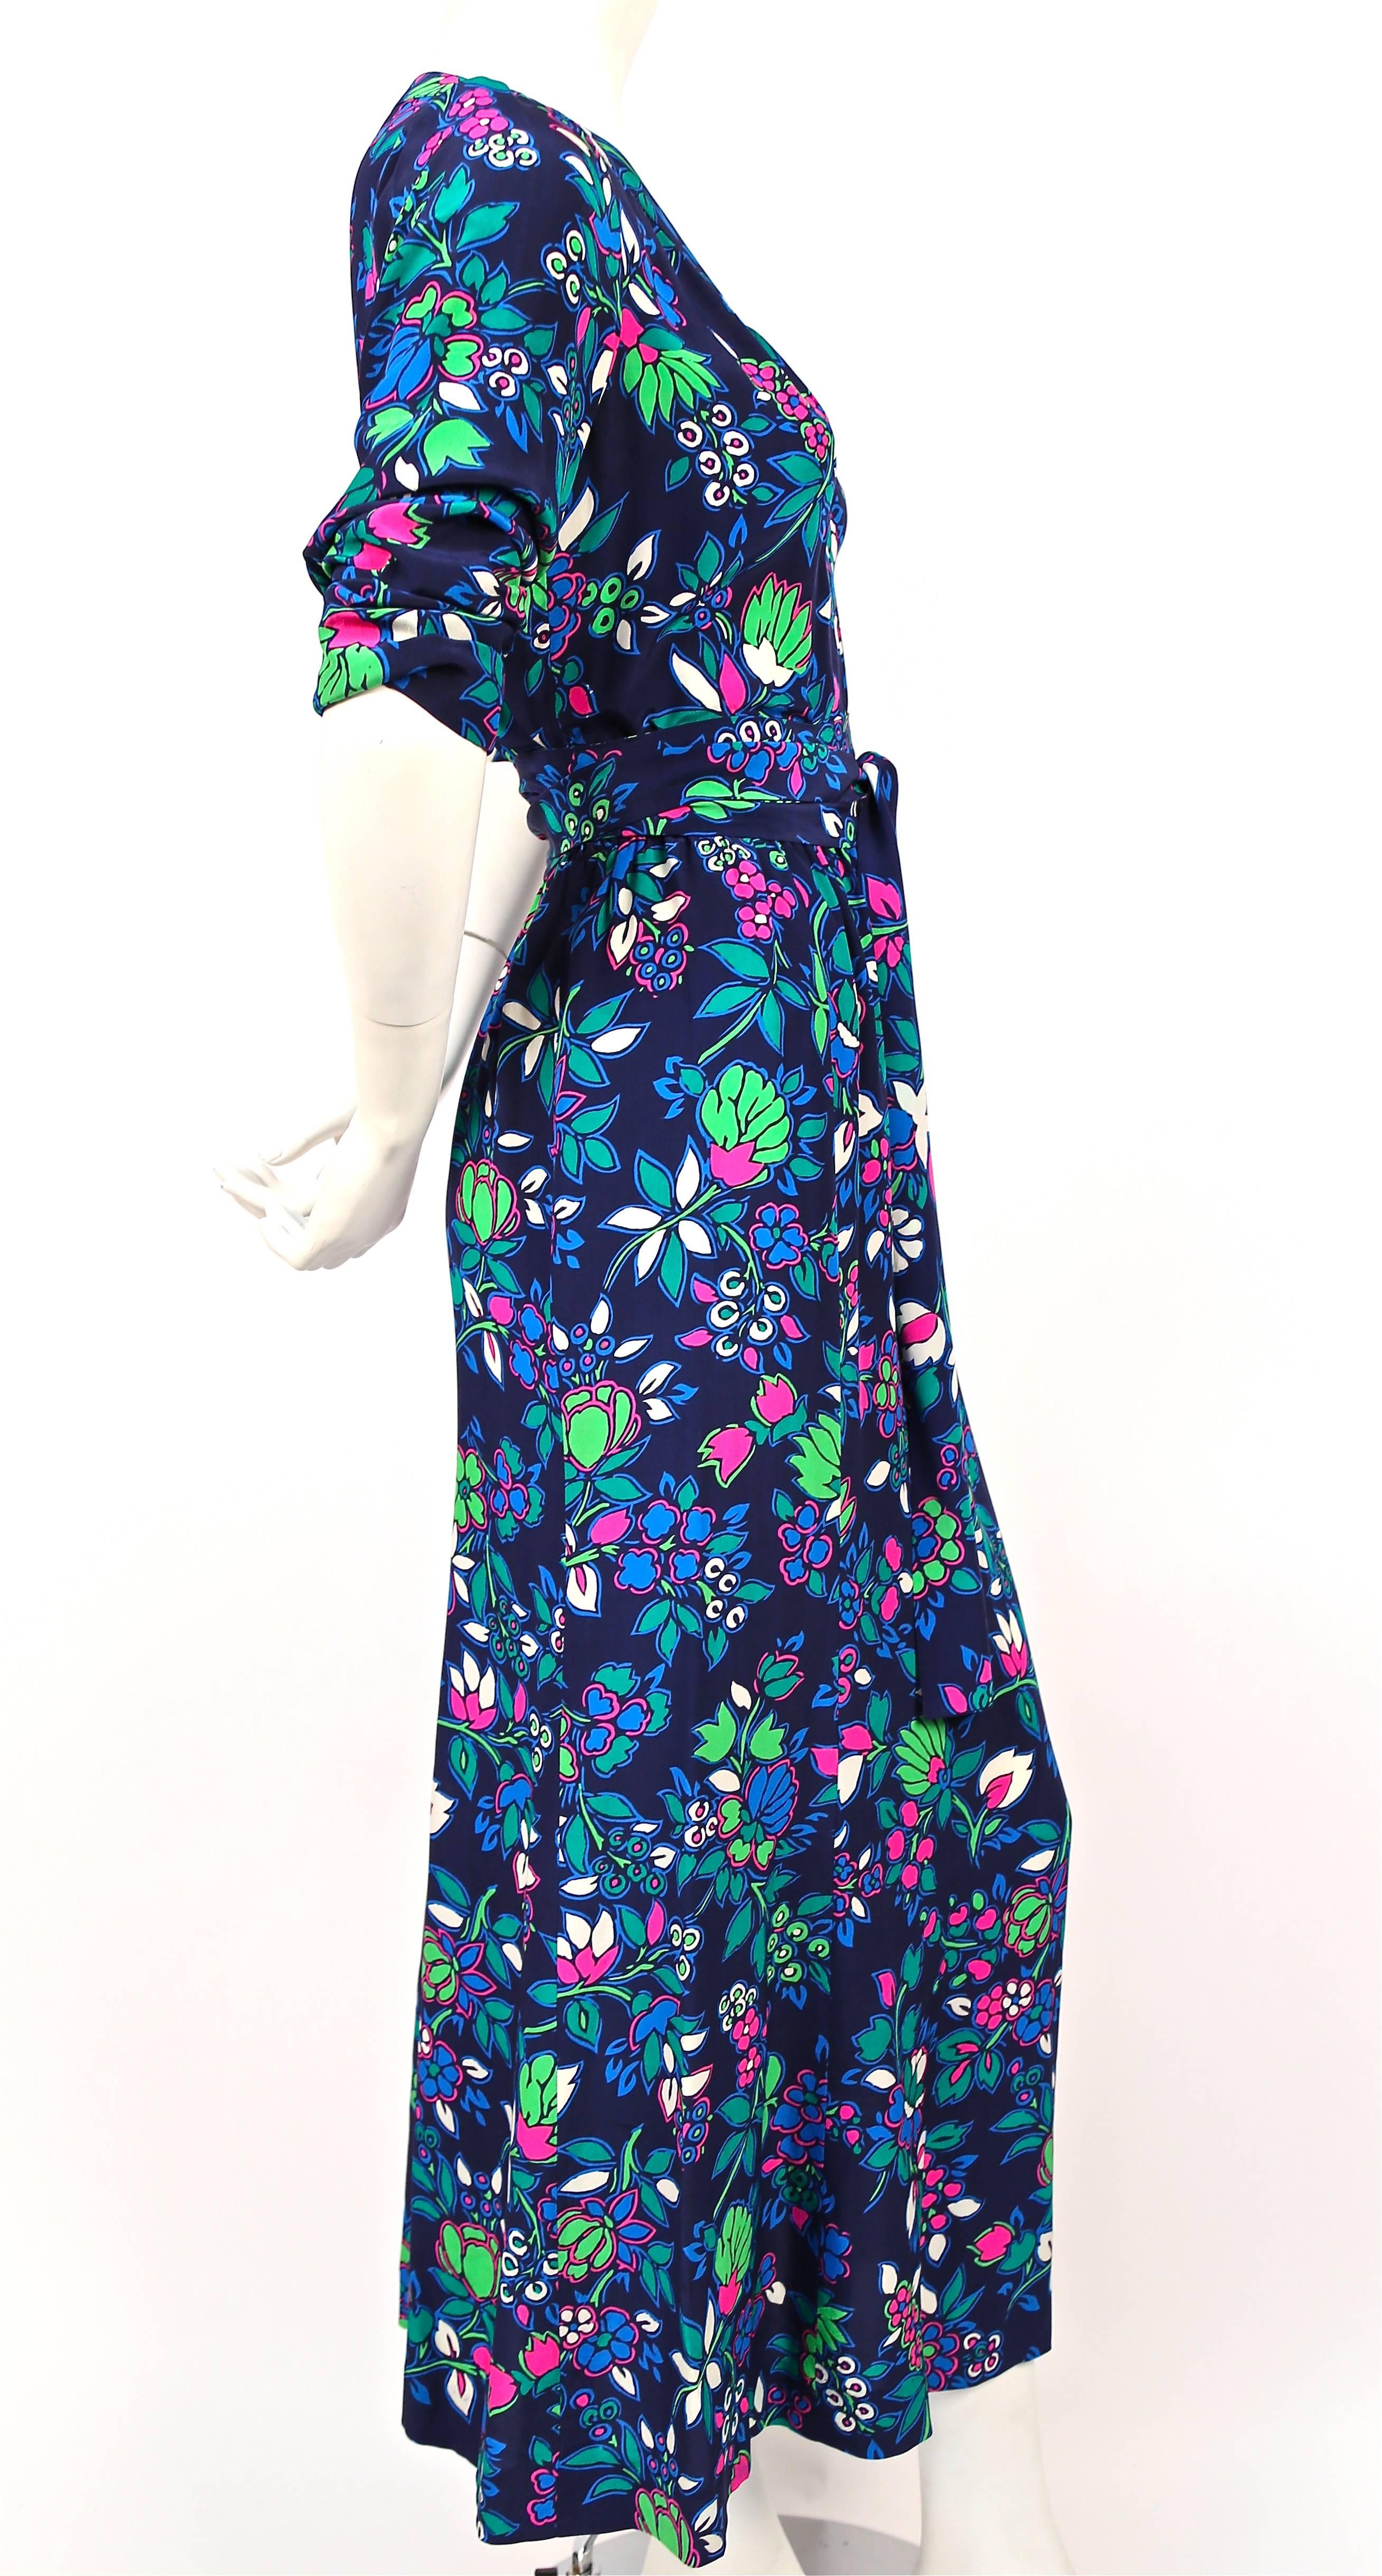 Floral silk dress with long waist tie and v-neckline from Yves Saint Laurent dating to the early 1980's. Labeled a size French size 38 however this better suits a FR 36. Dress measures approximately: bust 34-37